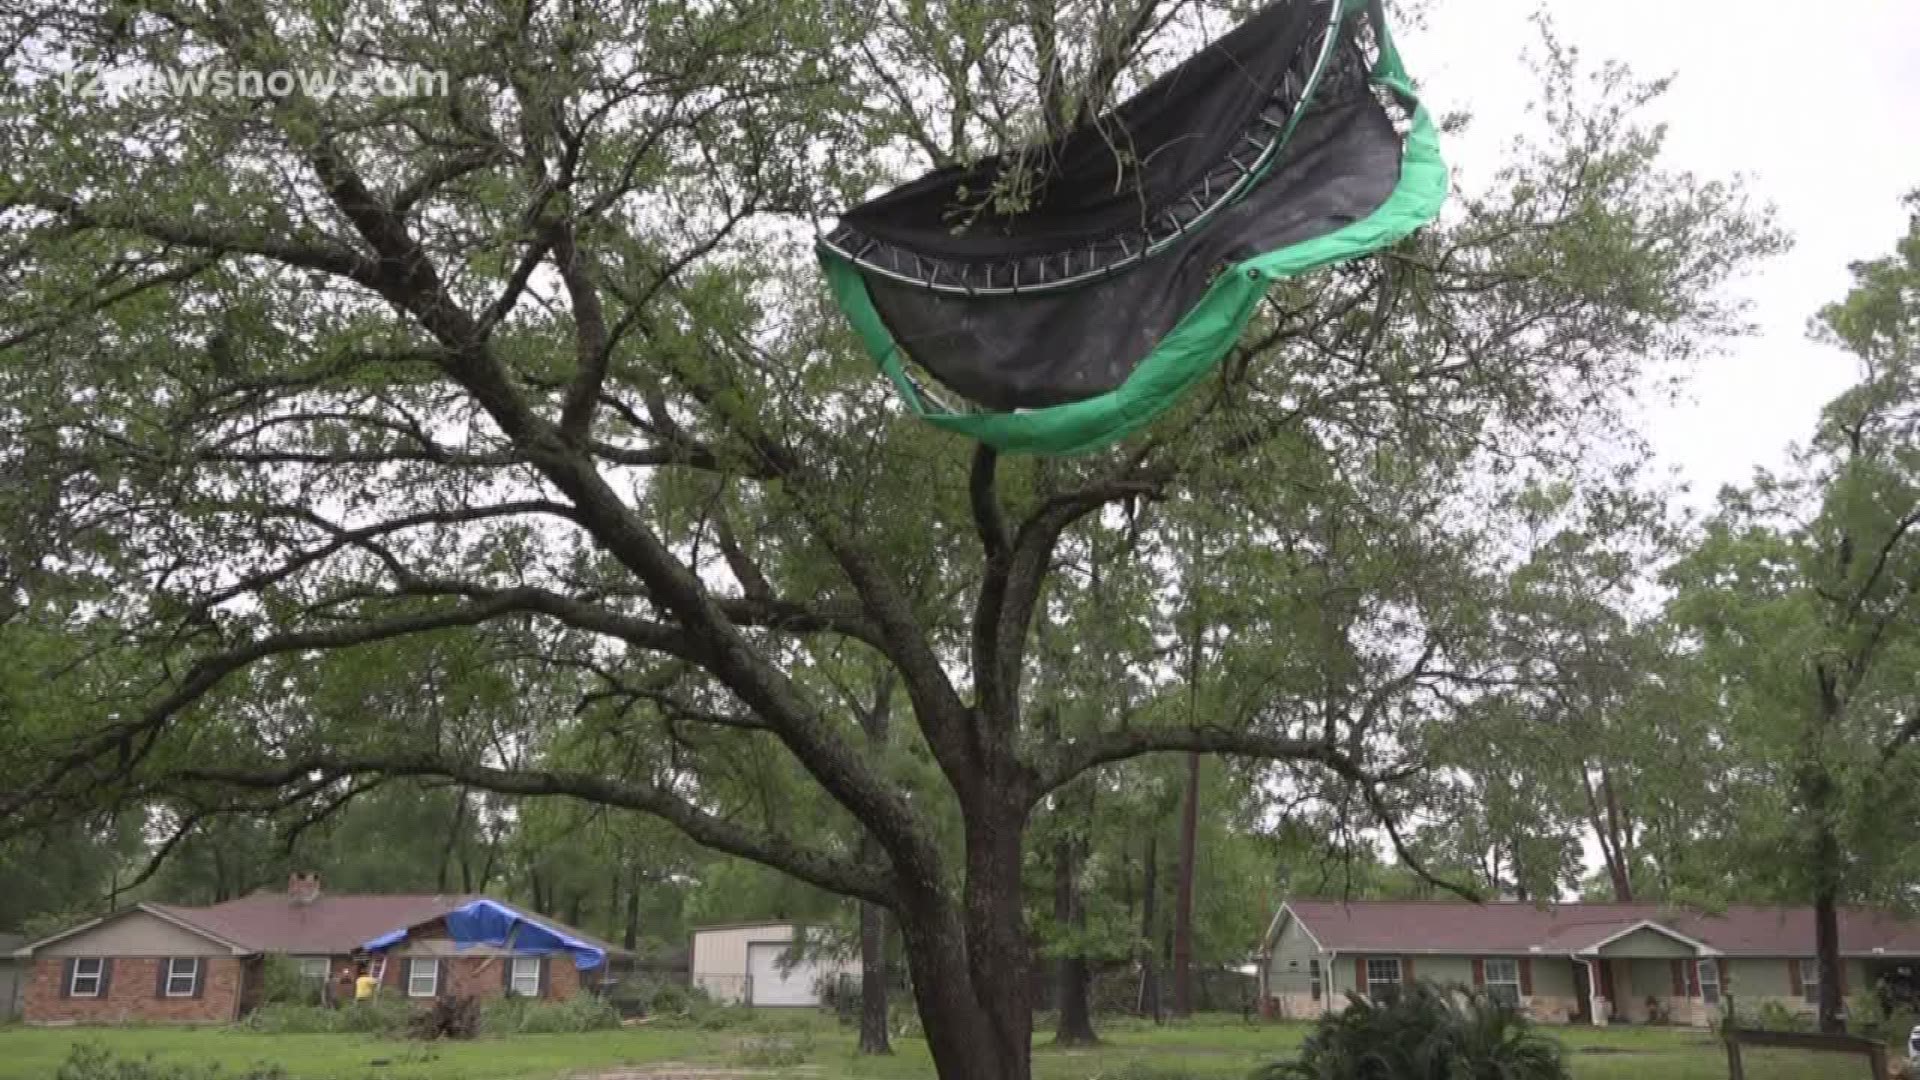 Severe Thunderstorms swept through Southeast Texas causing major damage throughout the area.